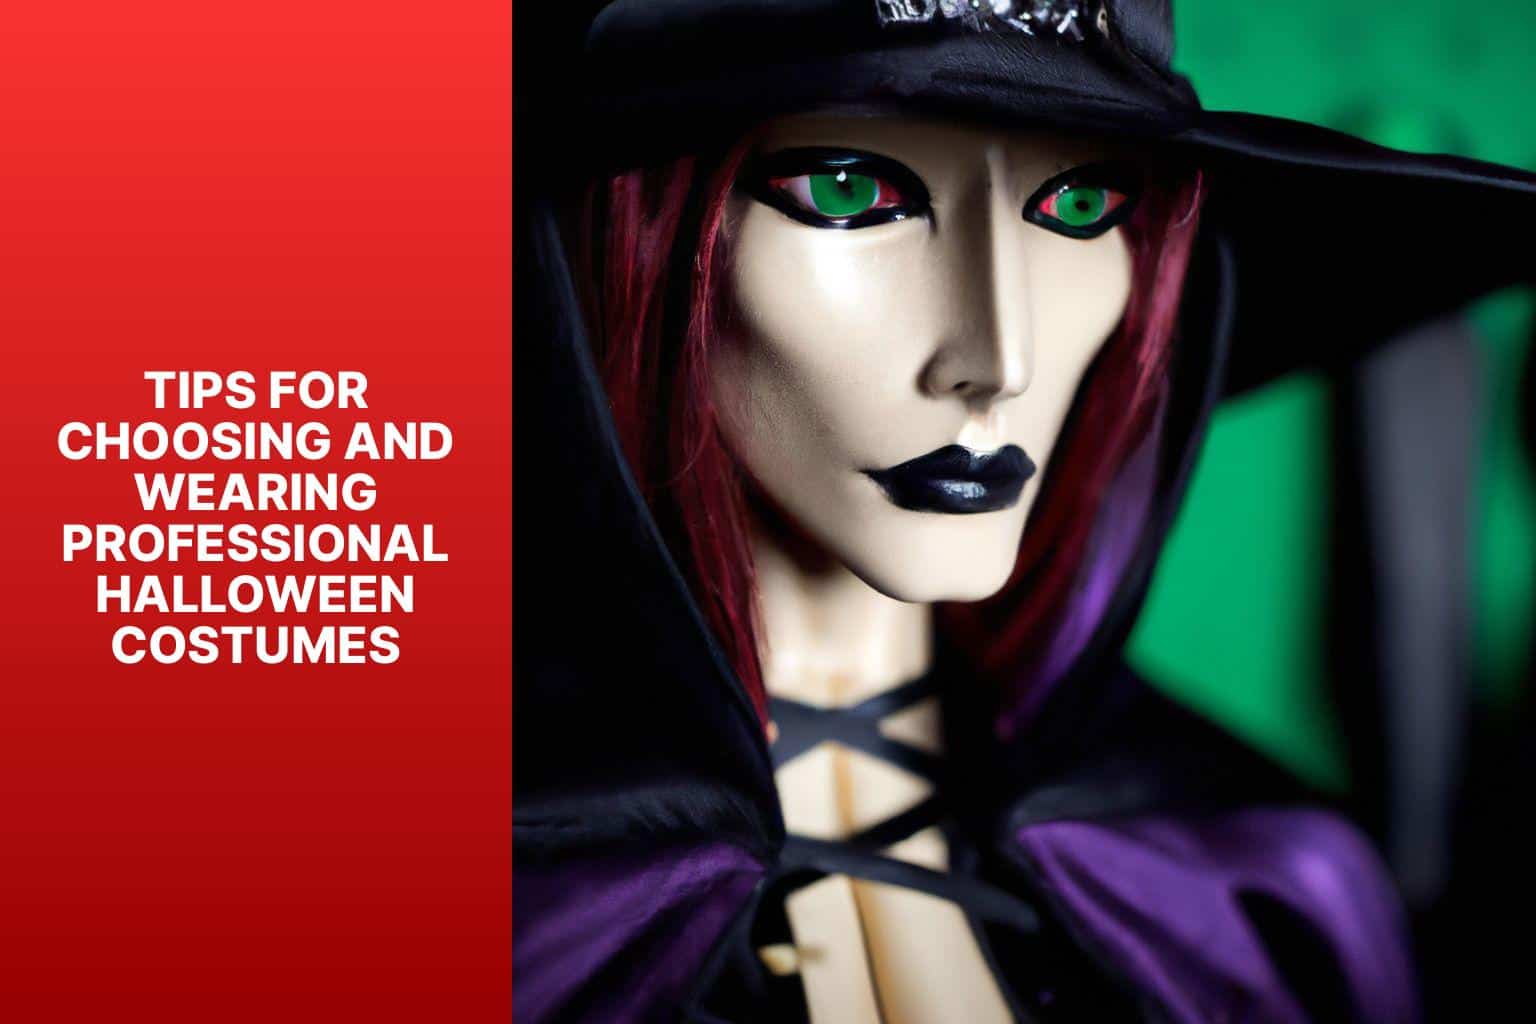 Tips for Choosing and Wearing Professional Halloween Costumes - professional halloween costumes for adults 